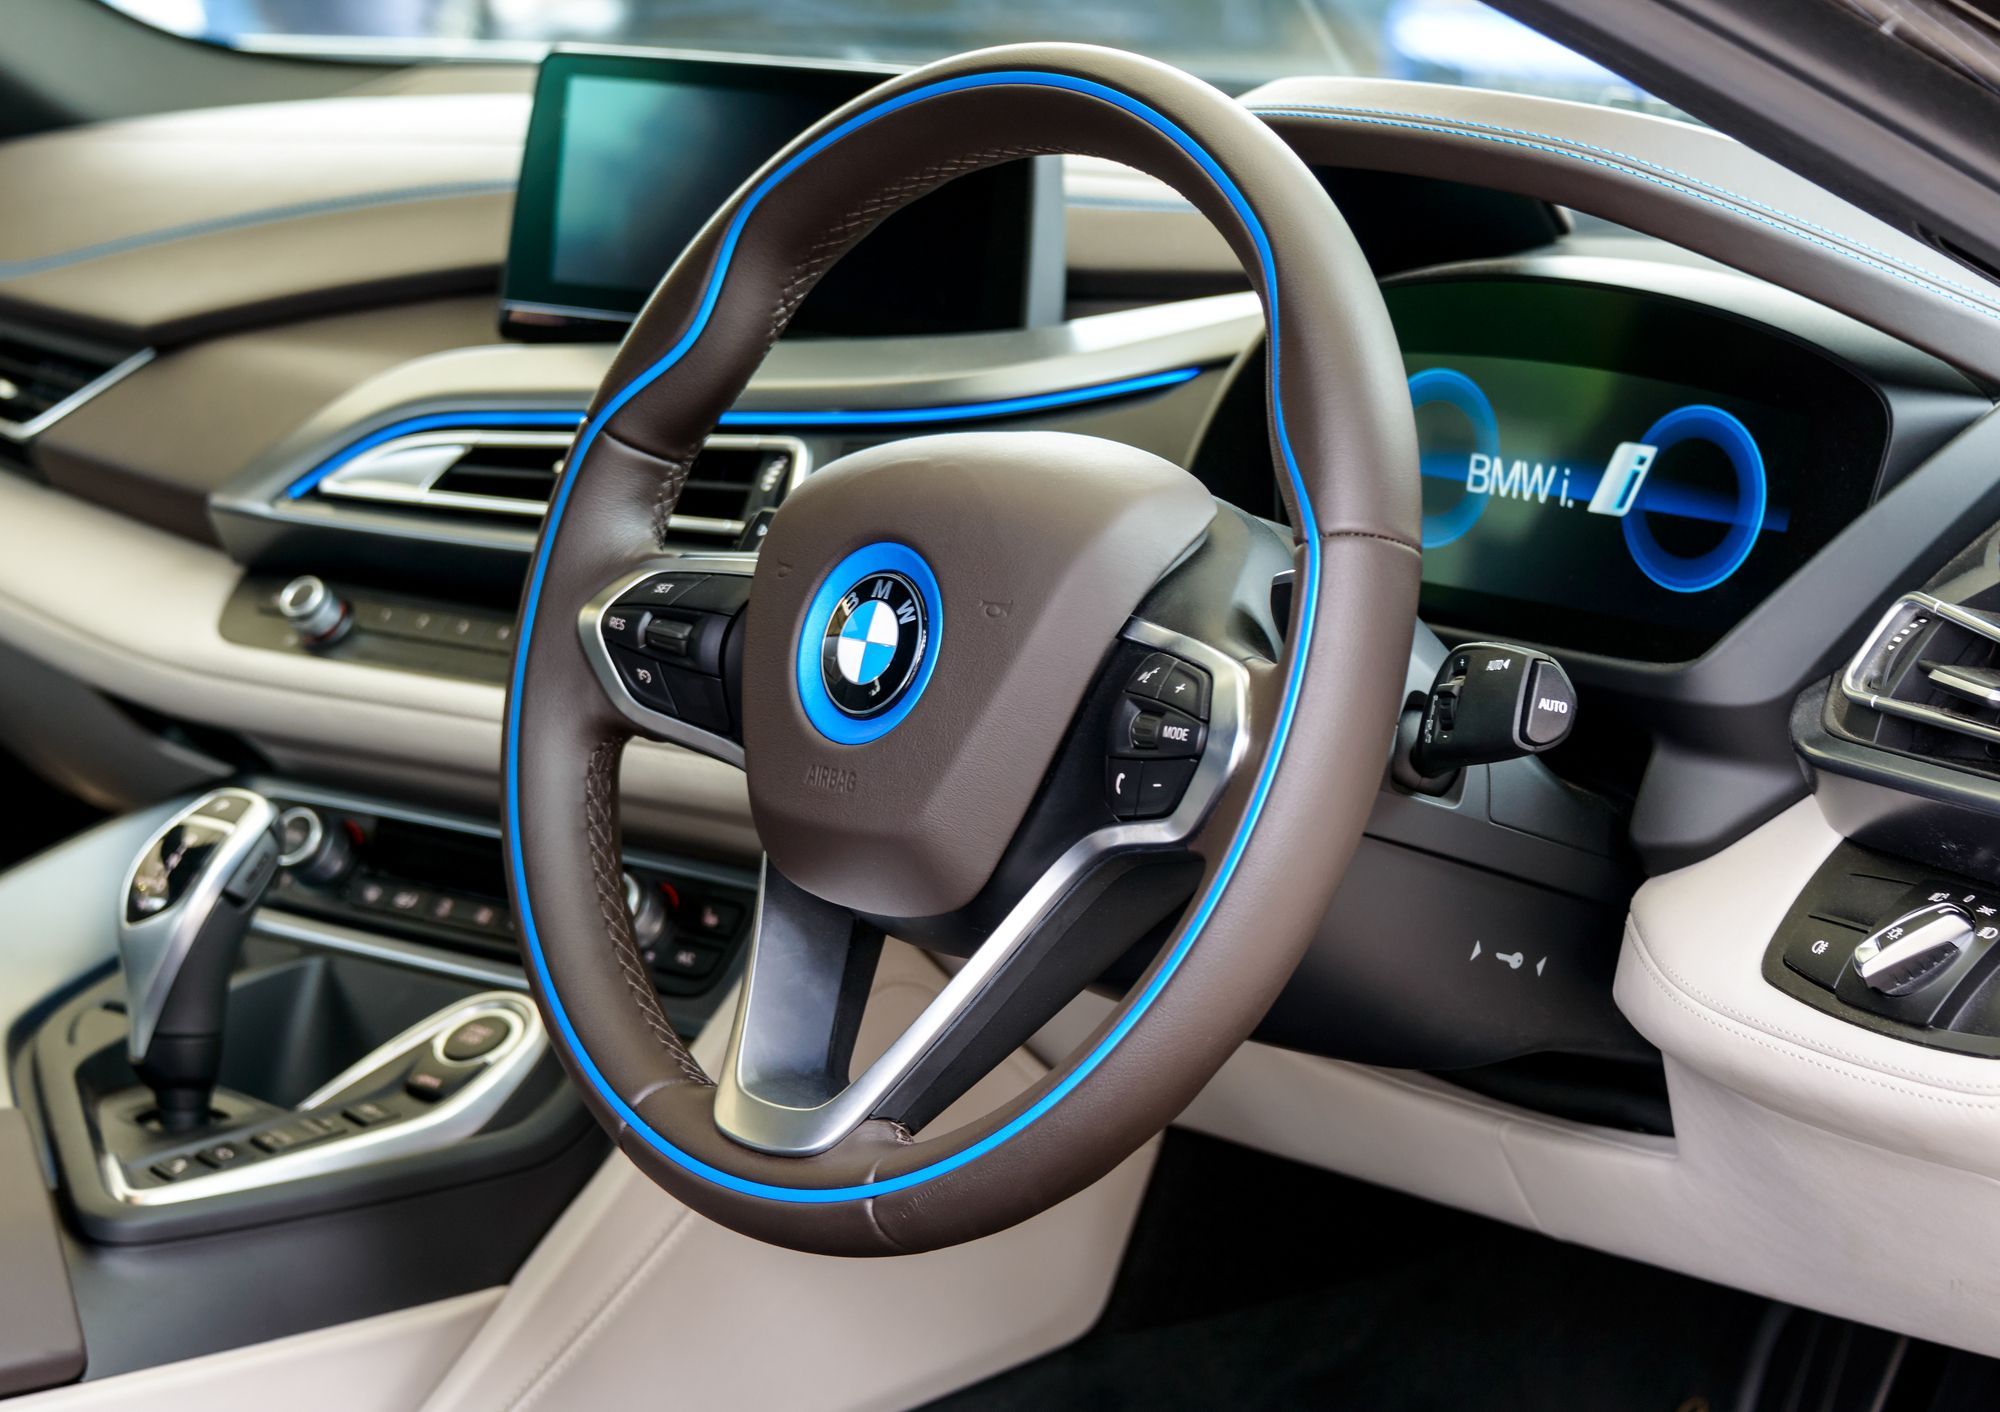 BMW class action filed over alleged battery defect in new hybrids.